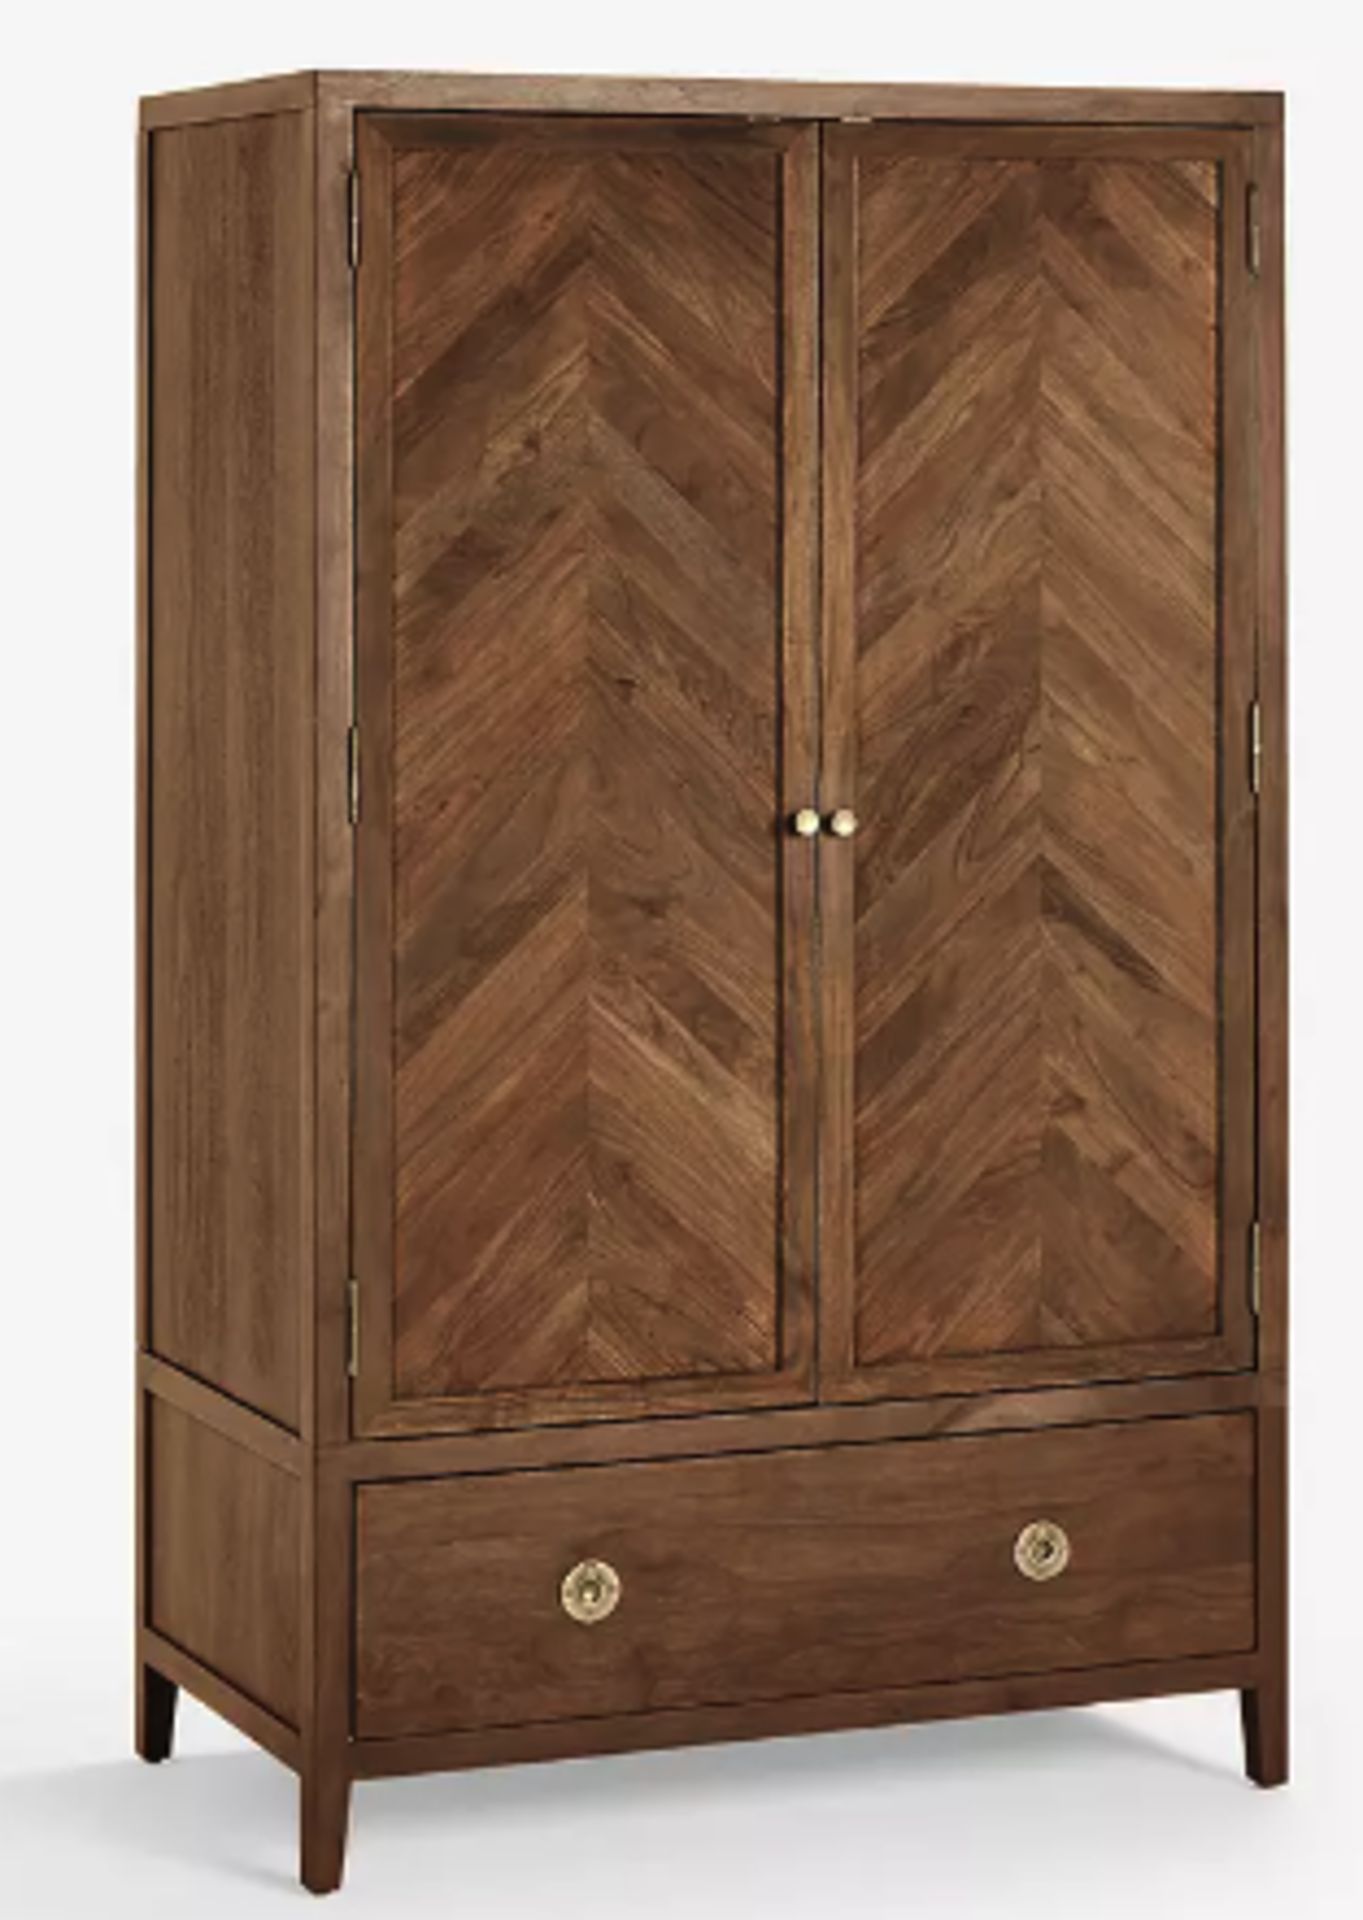 Item Description - John Lewis Padma Double Wardrobe with 1 Drawer, Brown/Brass - Stock Number